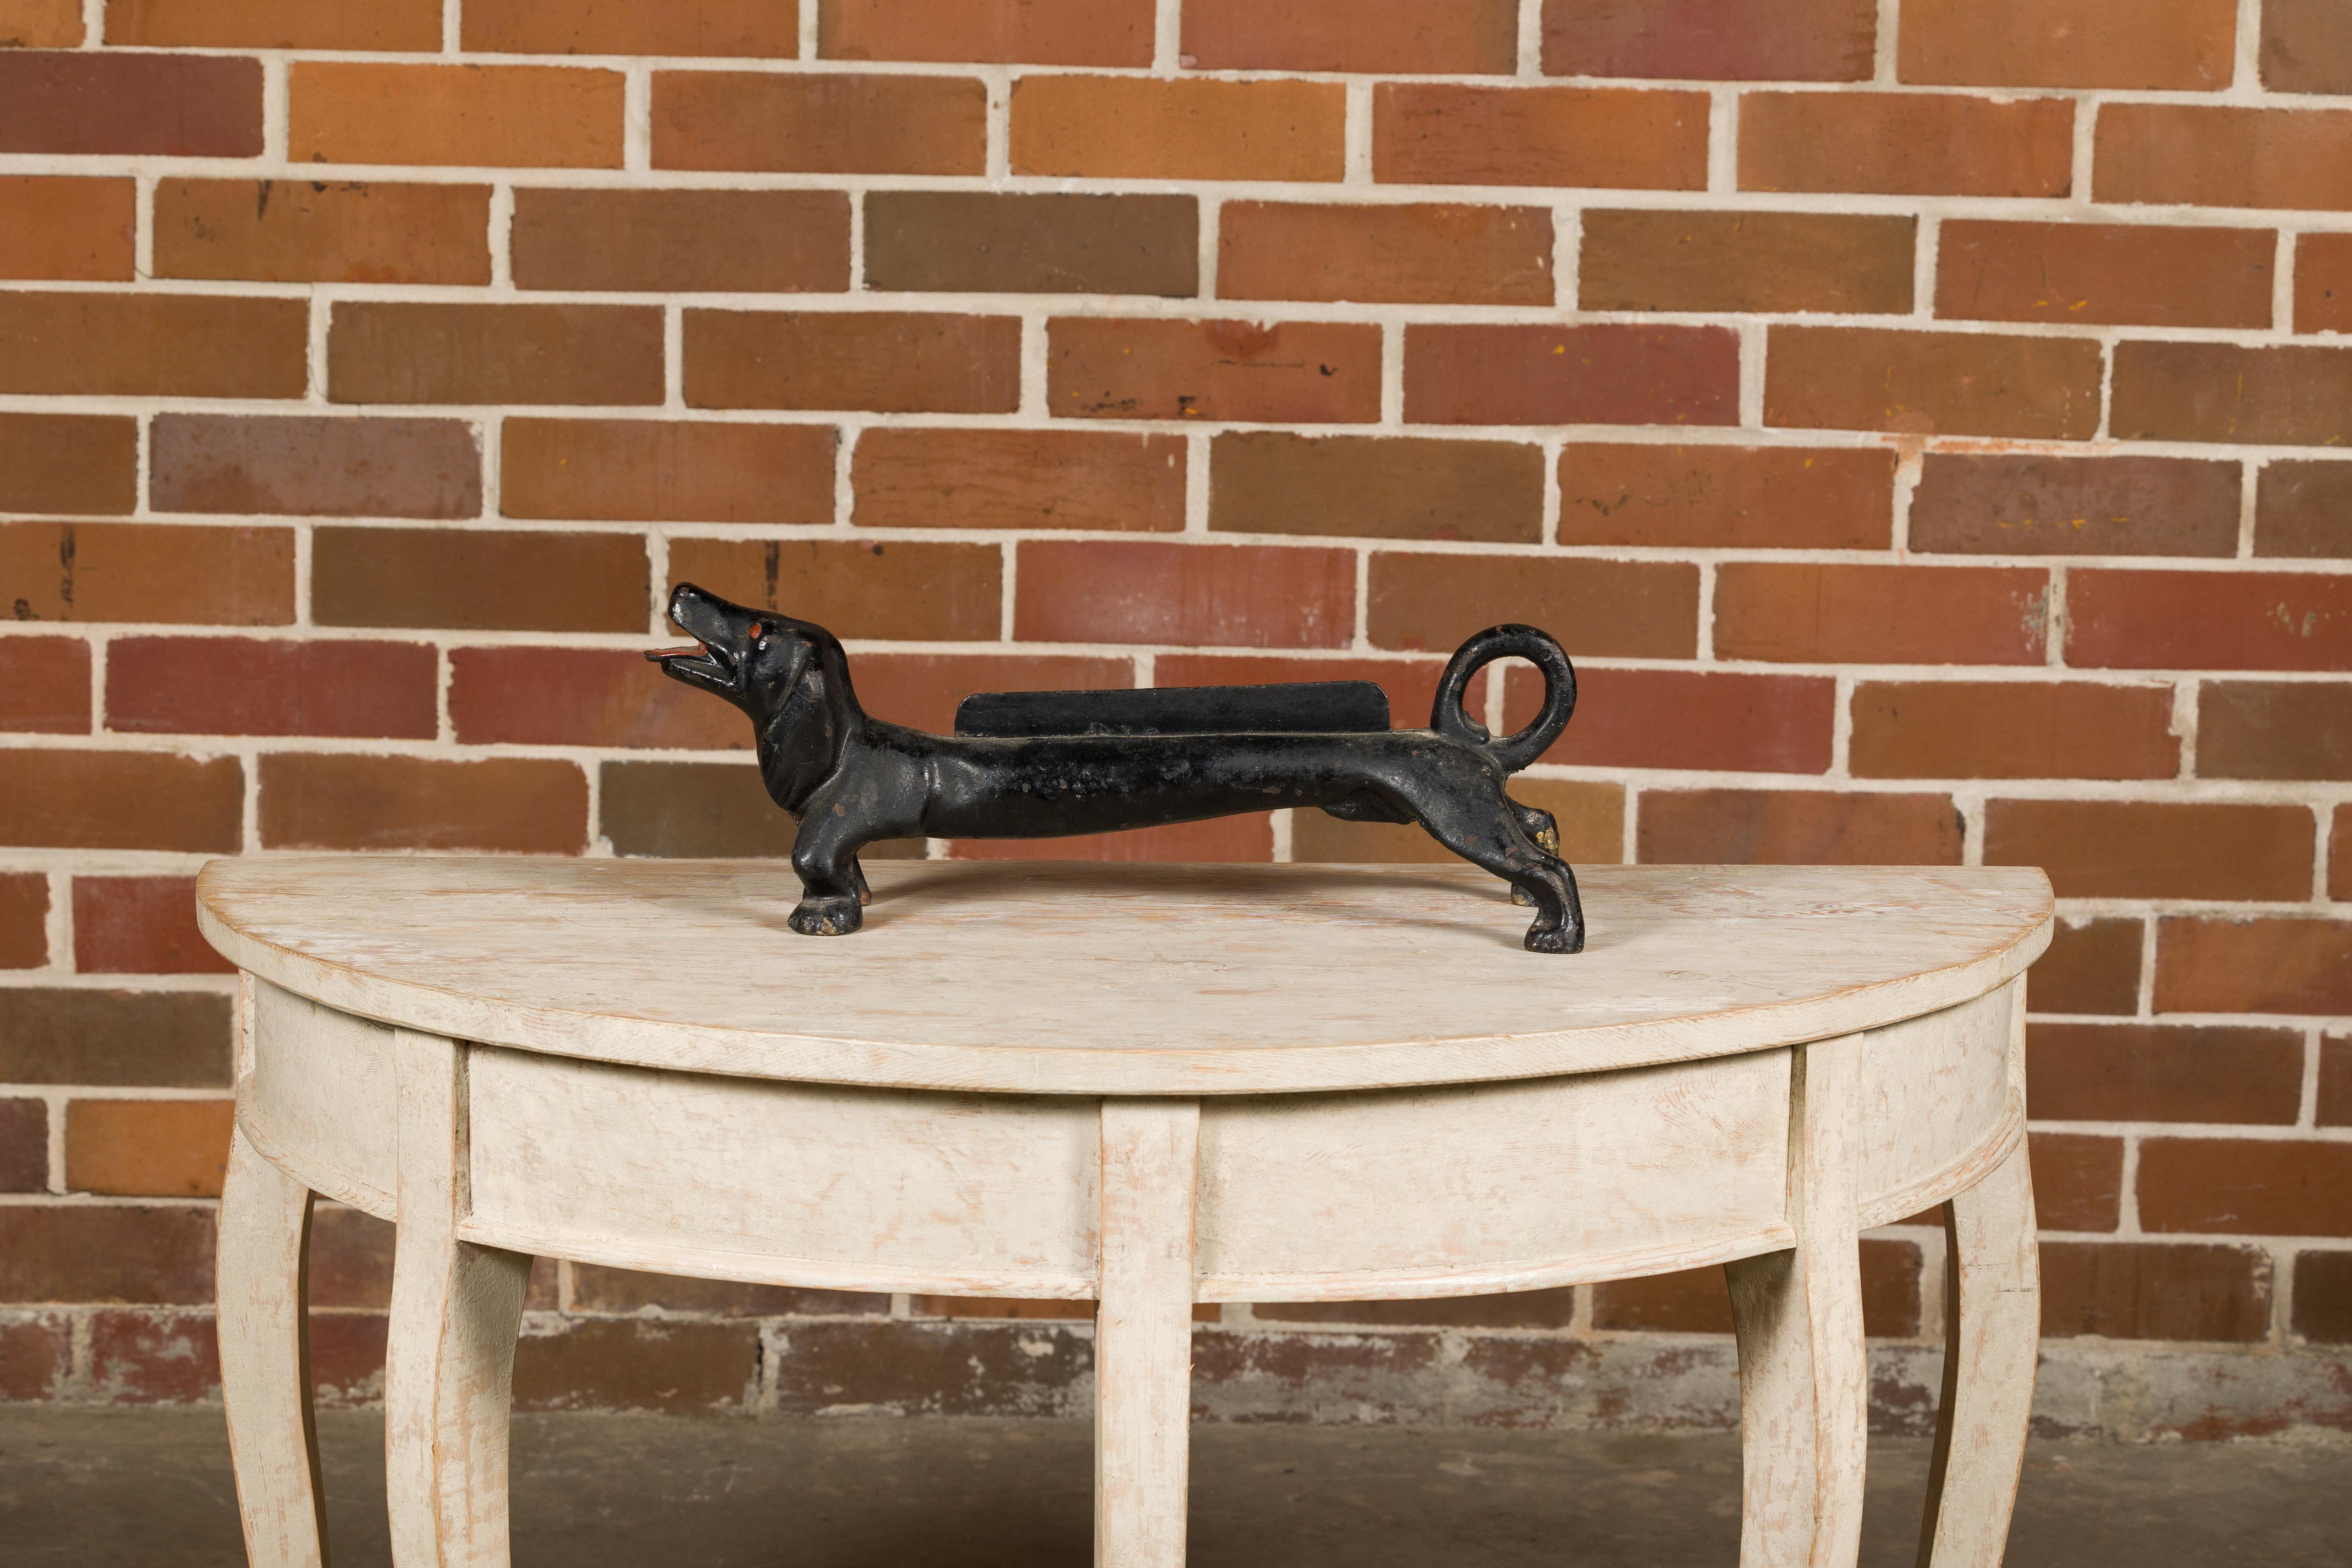 An English Victorian period iron boot scraper from the 19th century depicting a Dachshund dog. This English Victorian iron boot scraper from the 19th century is not just a functional piece but a charming work of art that adds character to any home.